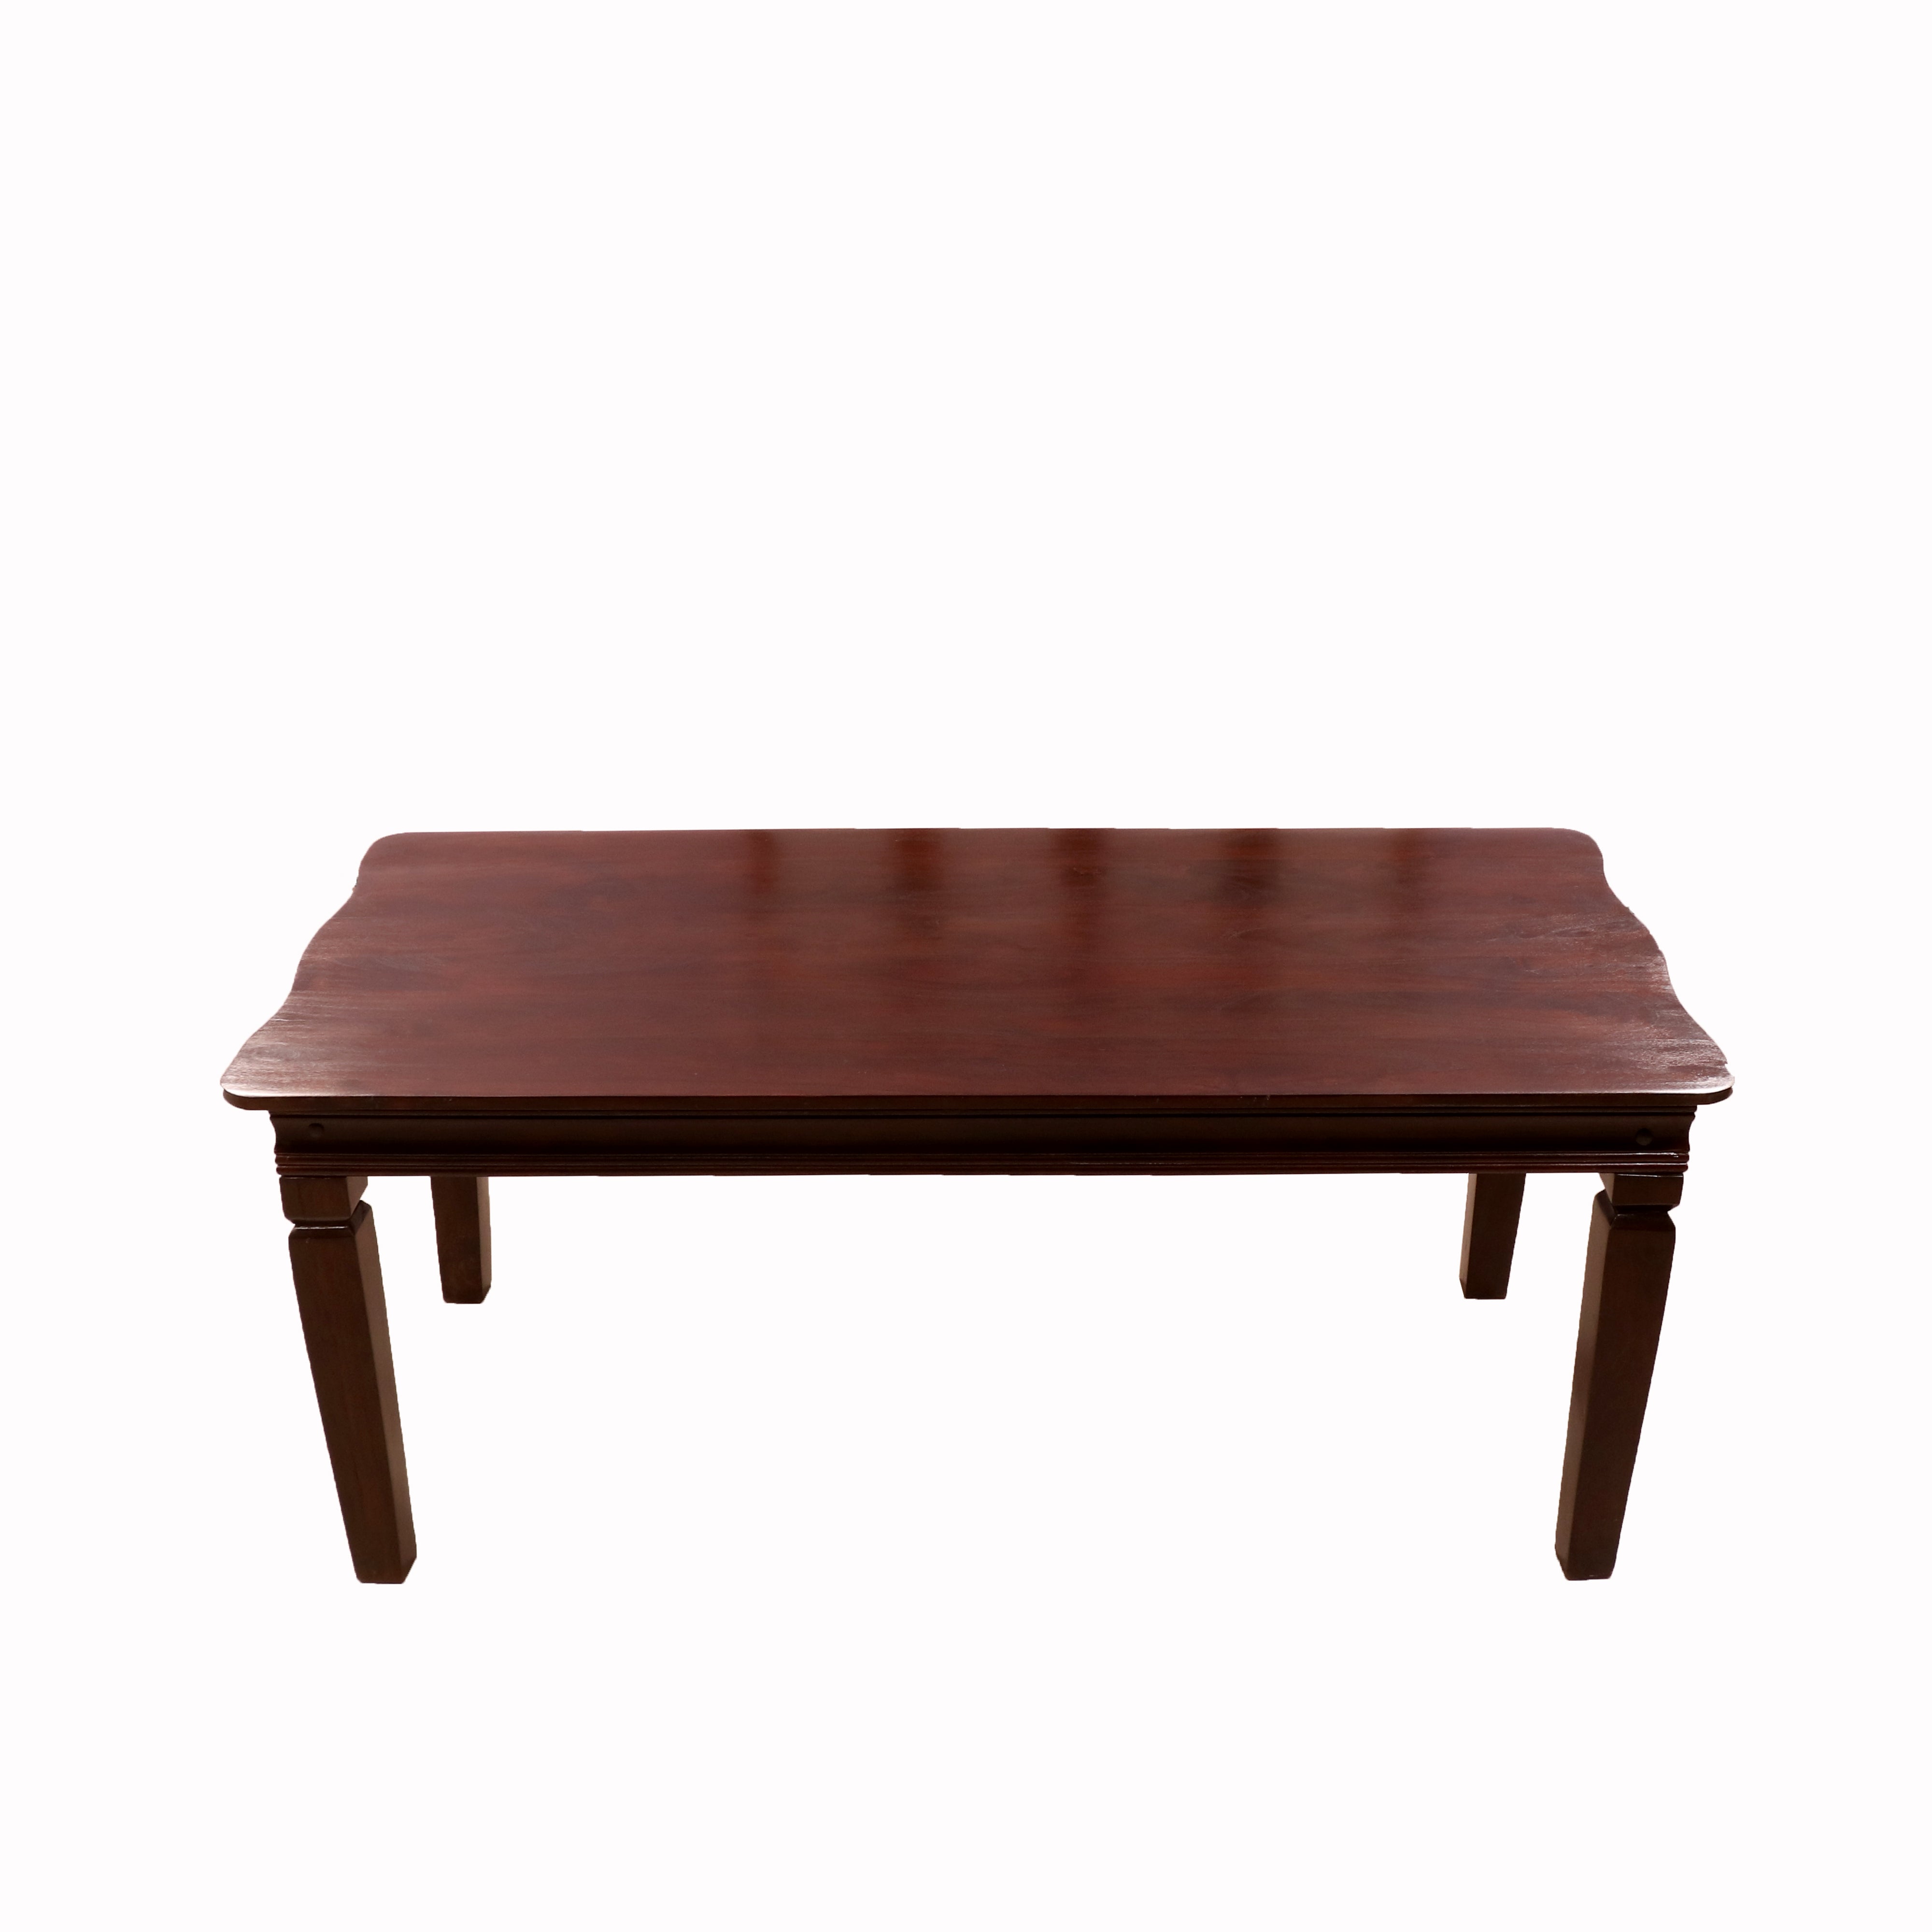 Curvy Solid Wood Table Dining Table